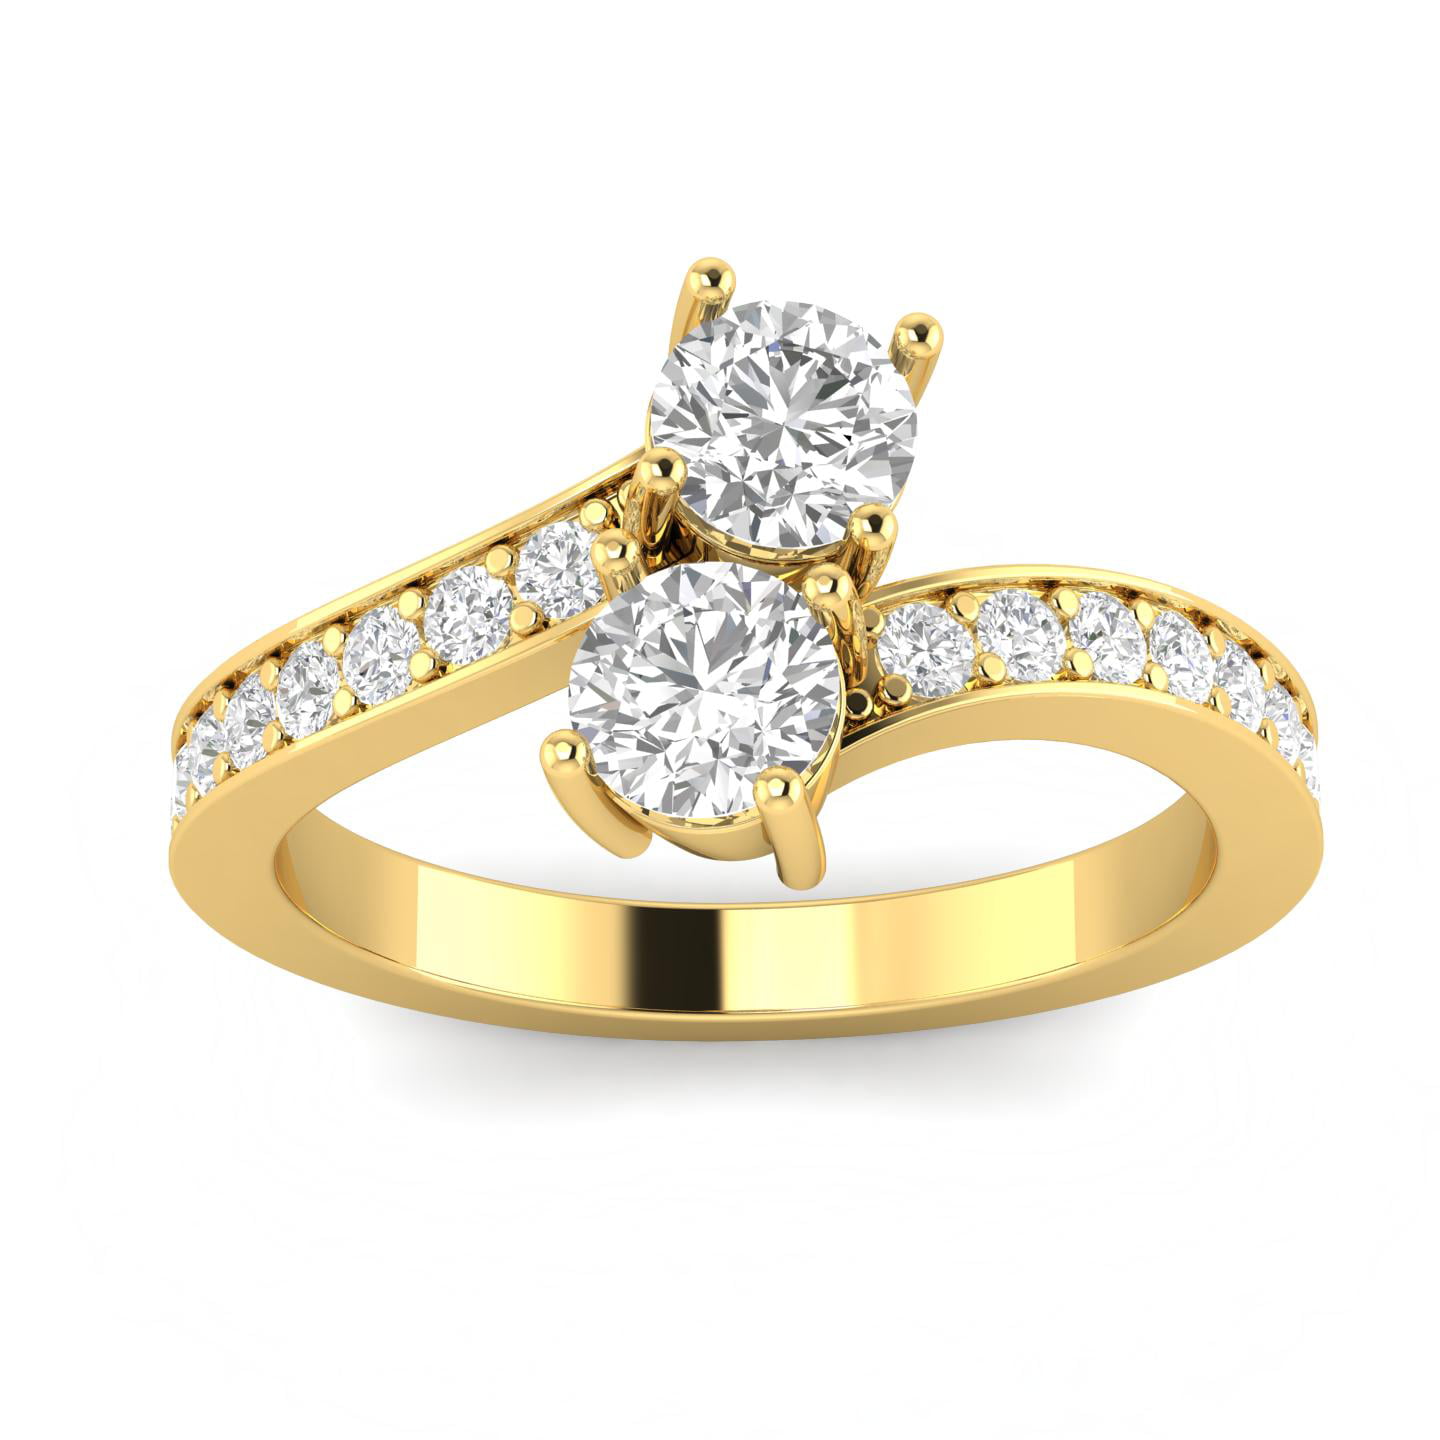 1.00ctw Diamond Two Stone Ring in 10k Yellow Gold (G-H, I2-I3, 1.00ctw ...